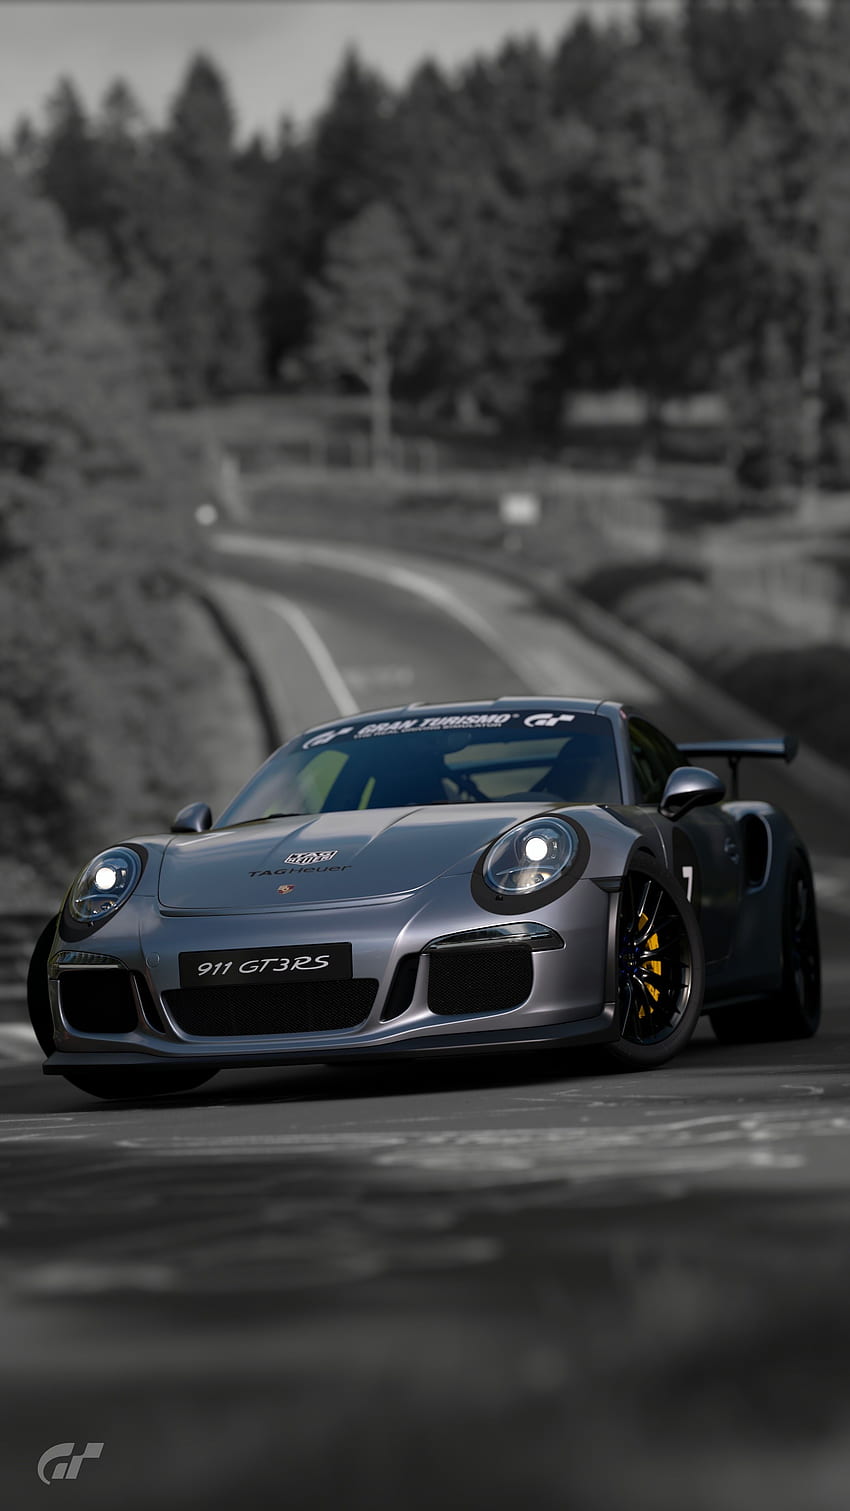 Download Porsche wallpapers for mobile phone free Porsche HD pictures